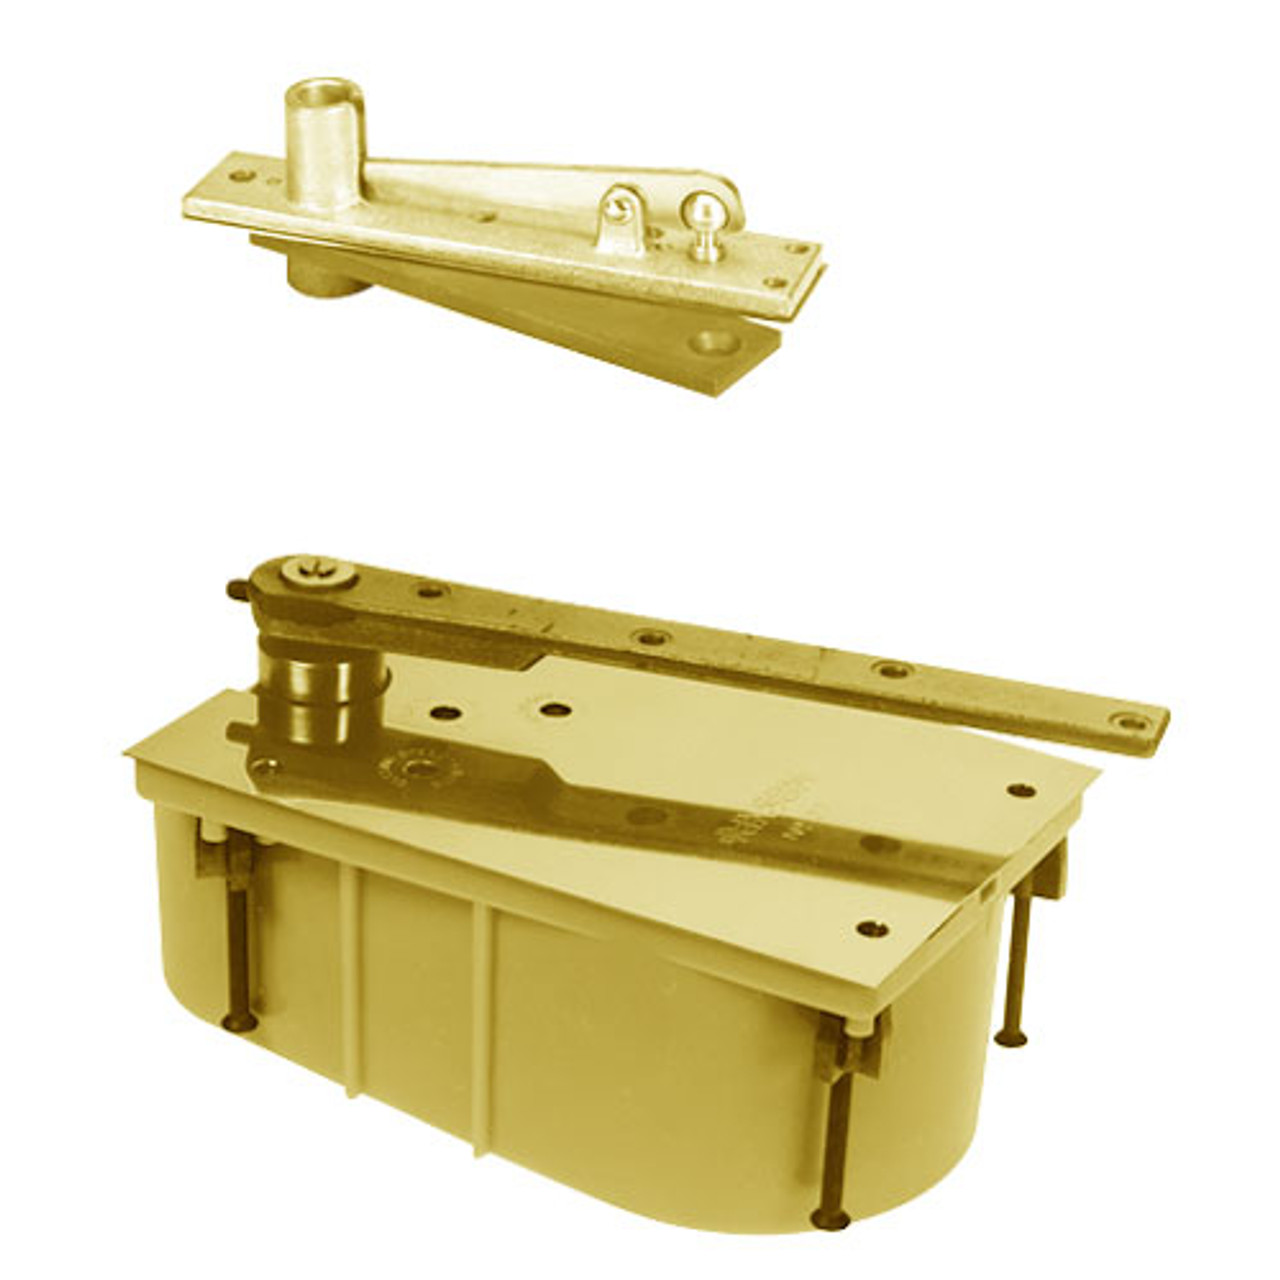 28-90S-554-LTP-RH-605 Rixson 28 Series Heavy Duty Single Acting Center Hung Floor Closer with Concealed Arm in Bright Brass Finish